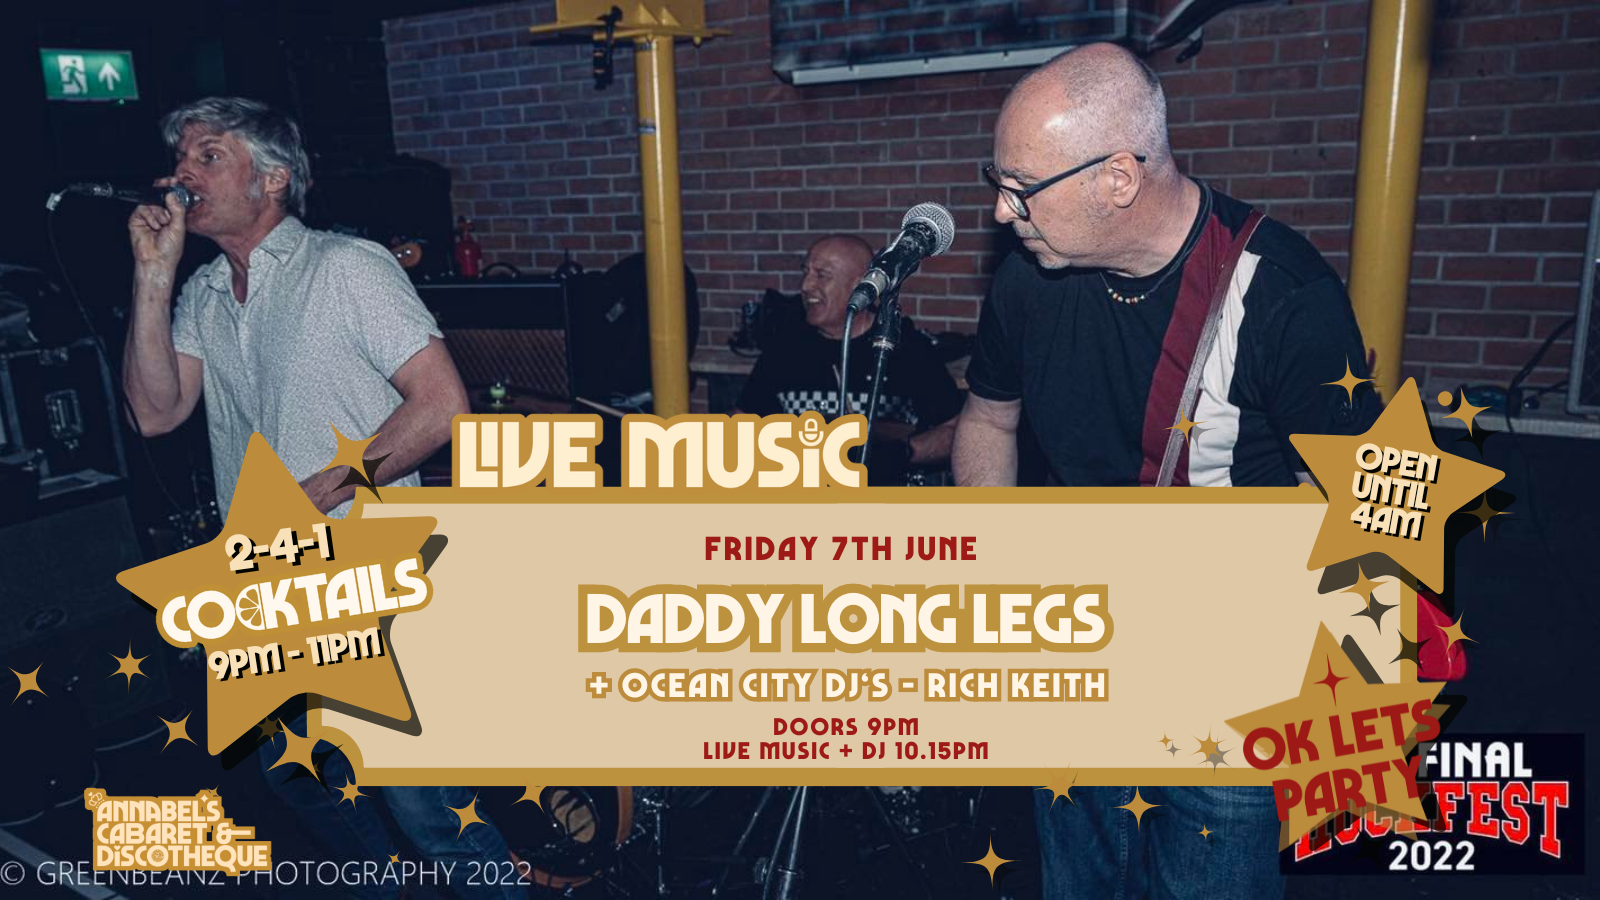 Live Music: DADDY LONG LEGS // Annabel’s Cabaret & Discotheque